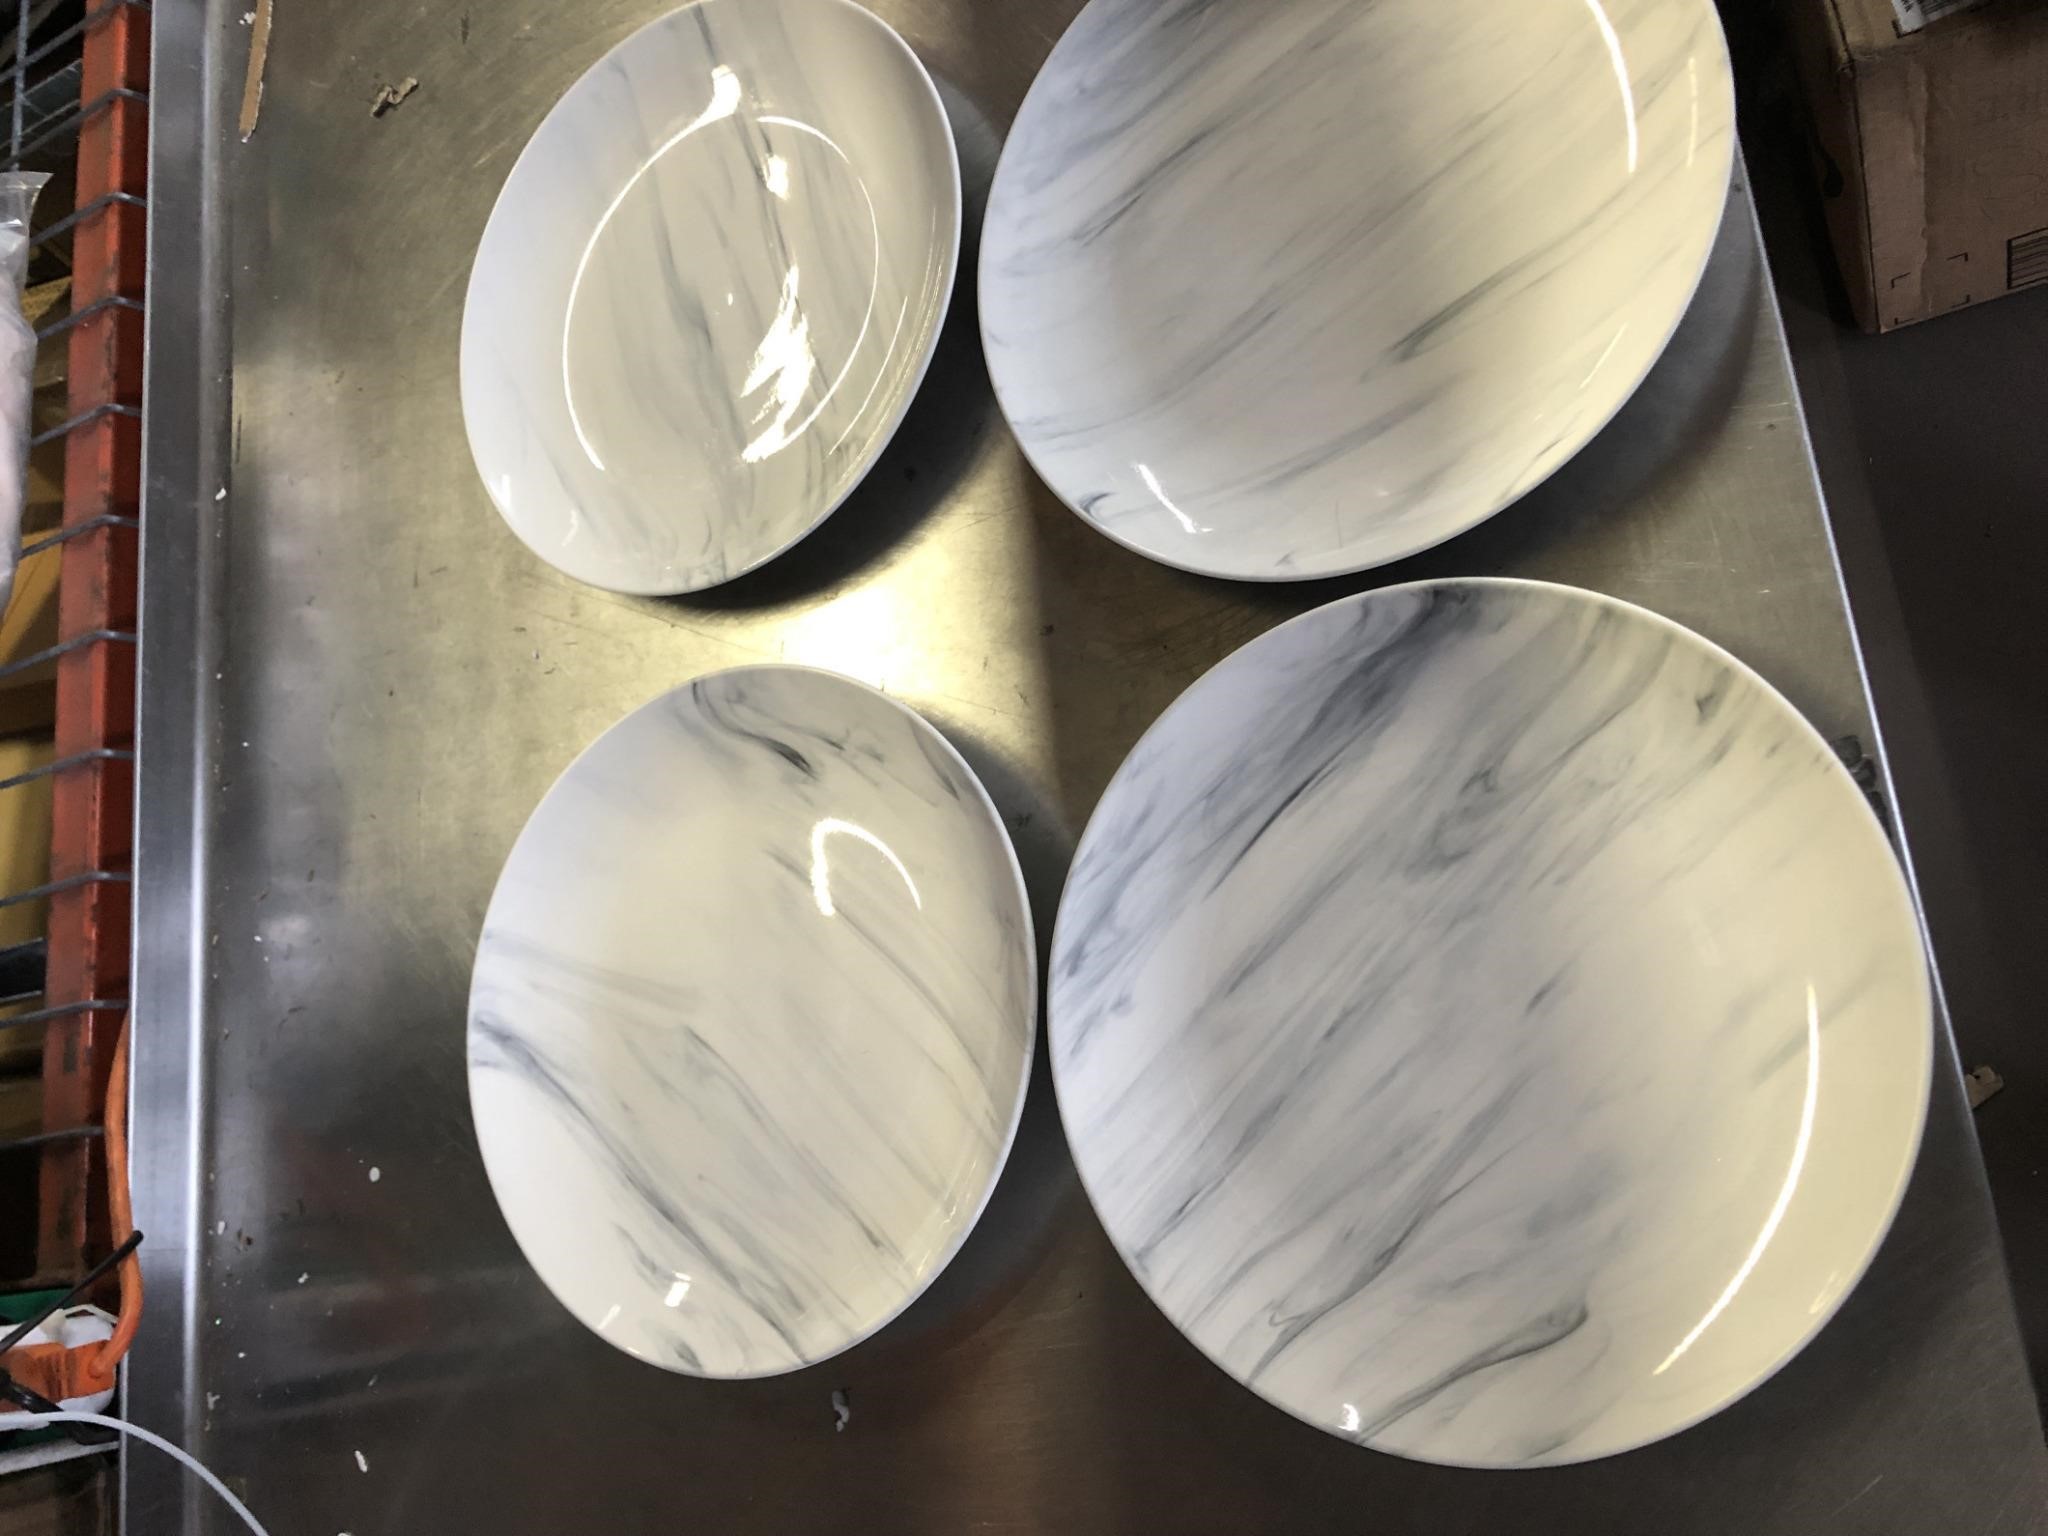 Marbled Plates (4 plates) 10.5”